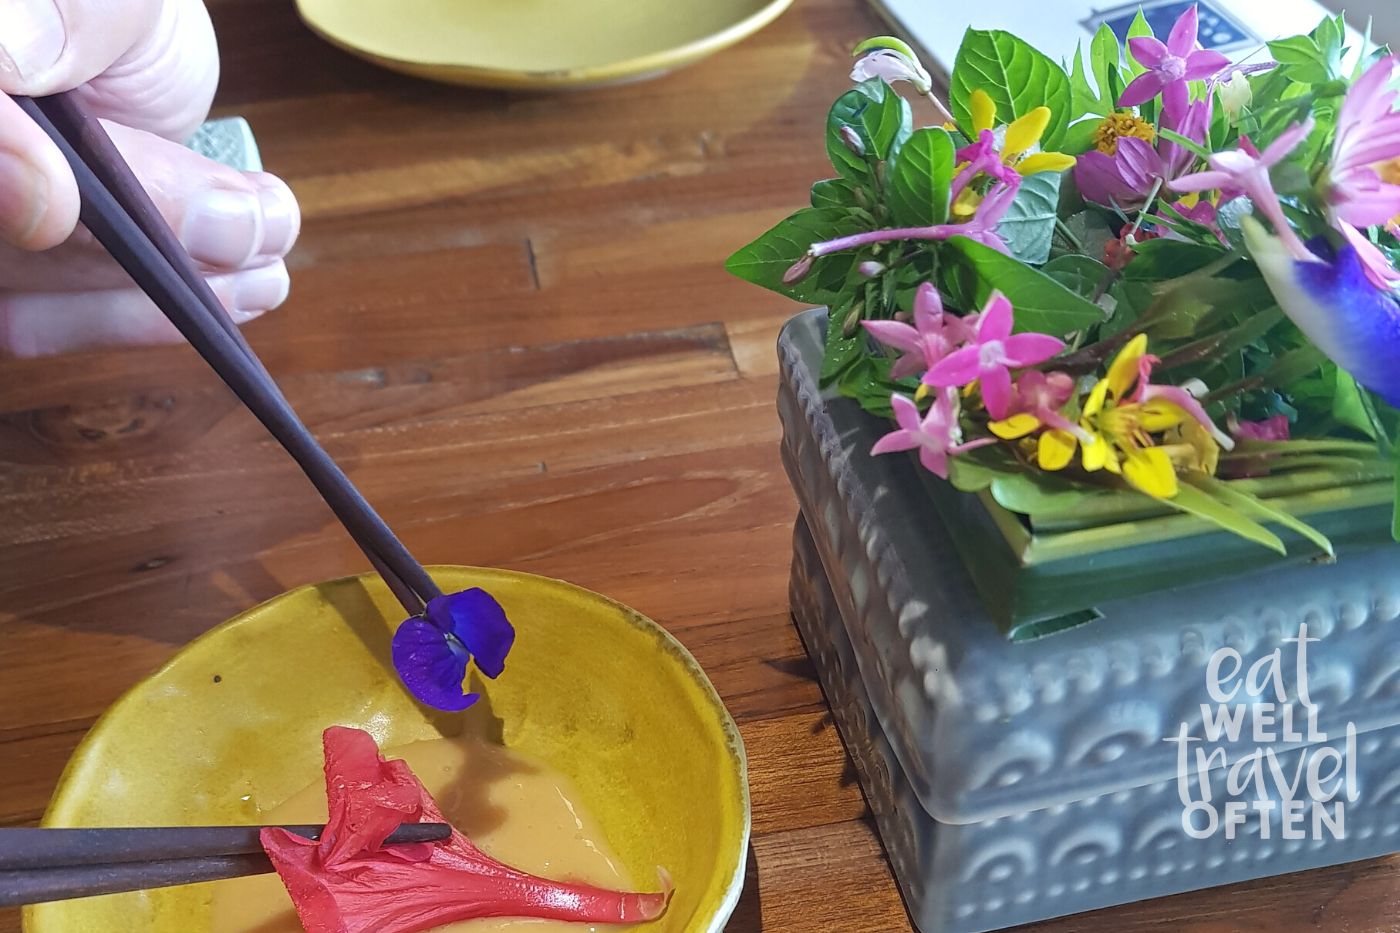 Chopsticks picking up bright coloured flowers in a yellow bowl